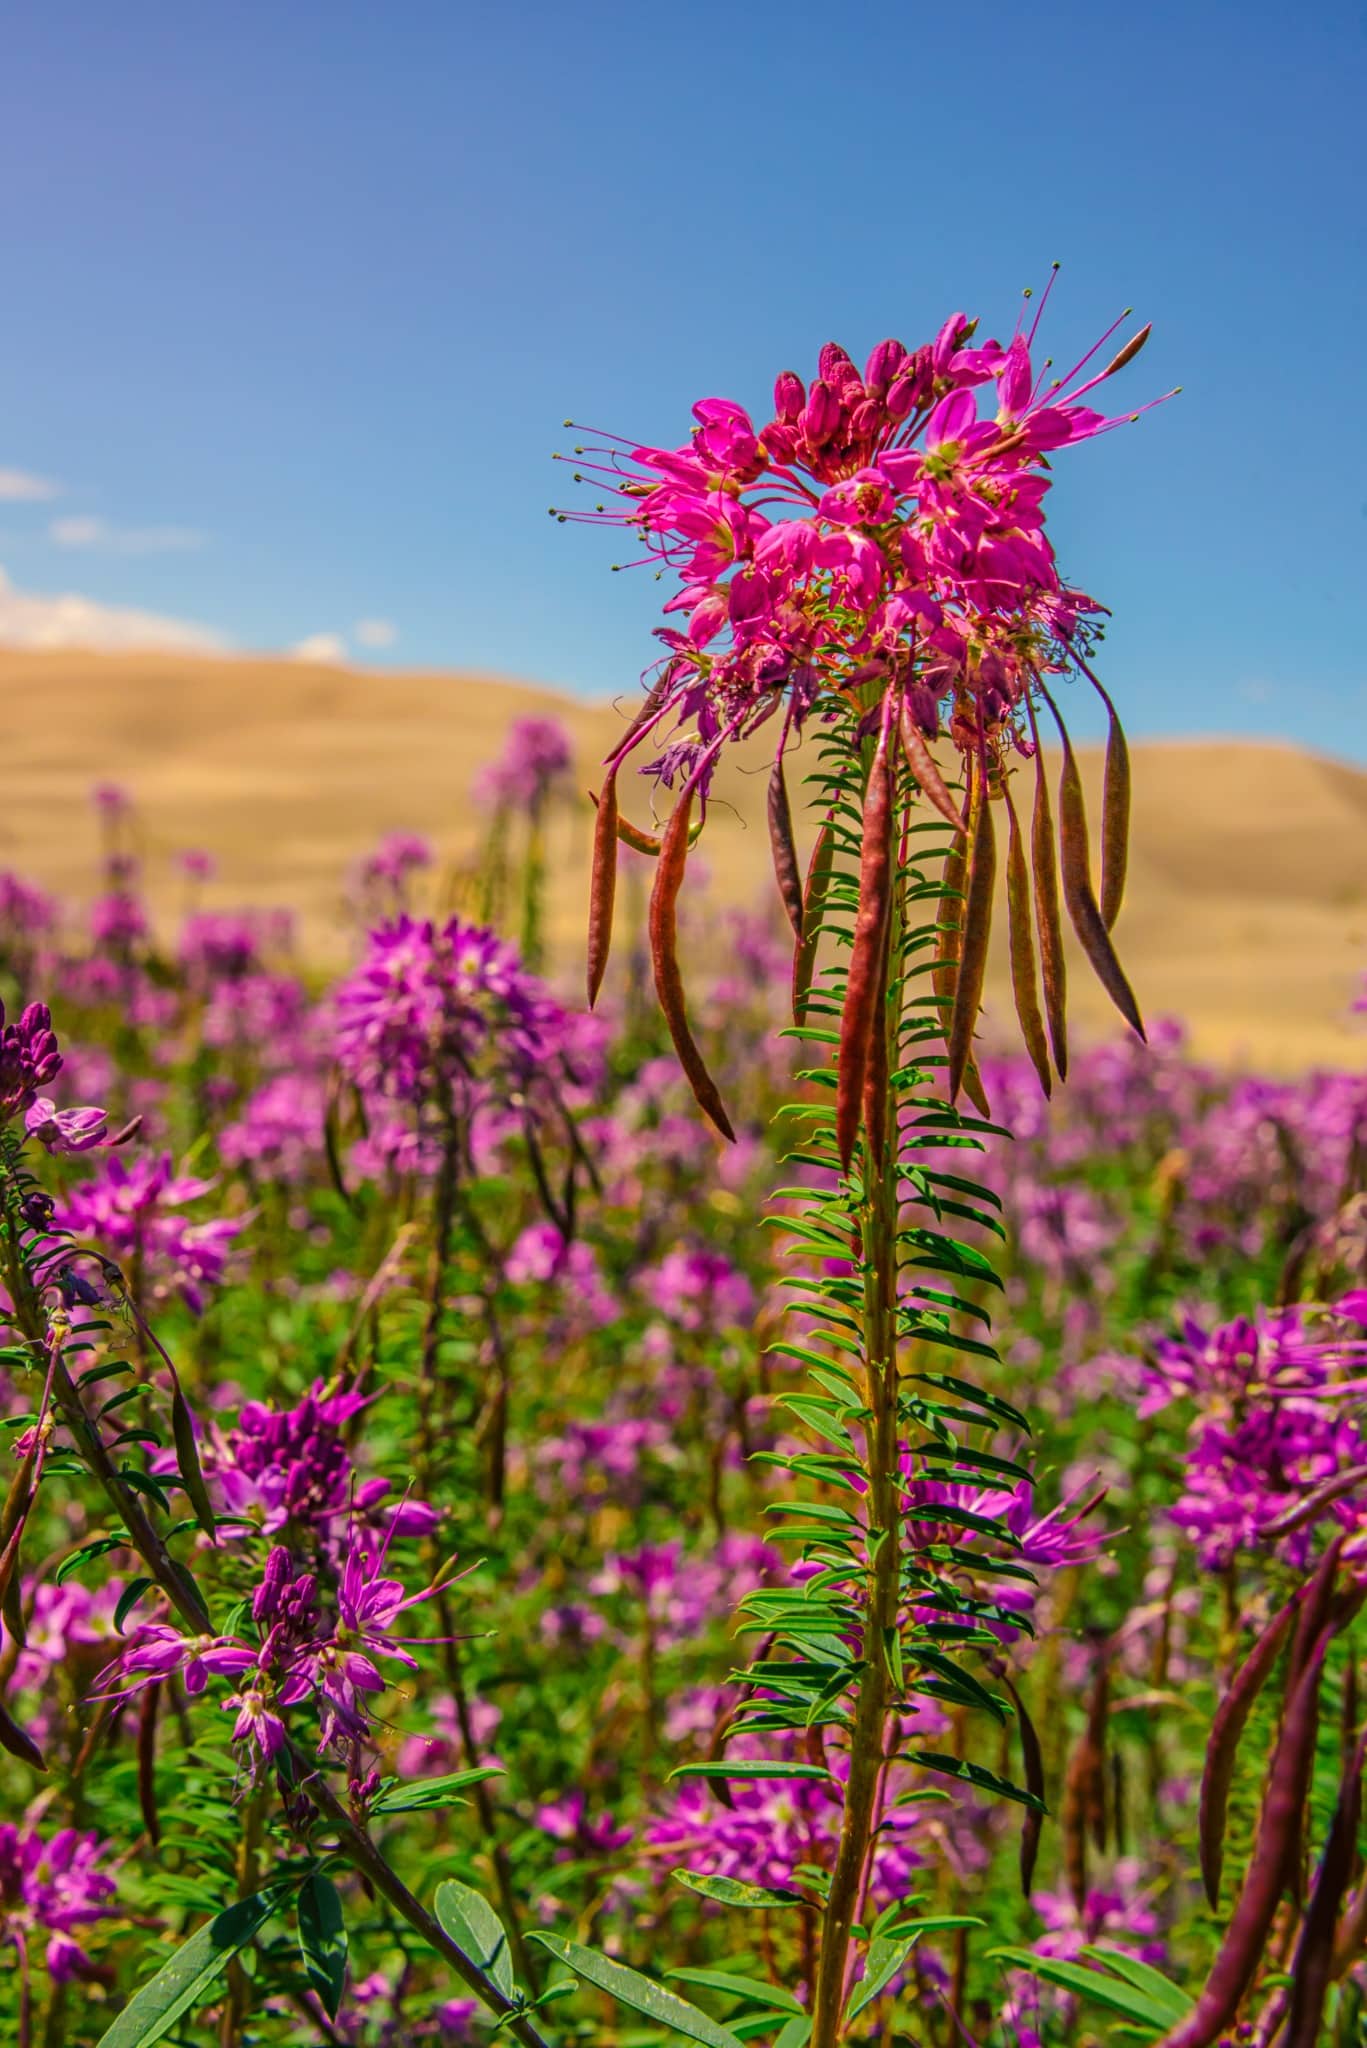 A field of Rocky Mountain Beeplants grow next to the beginning of the Medano Pass Primitive 4x4 raod in Sand Dunes National Park and Preserve in Colorado.